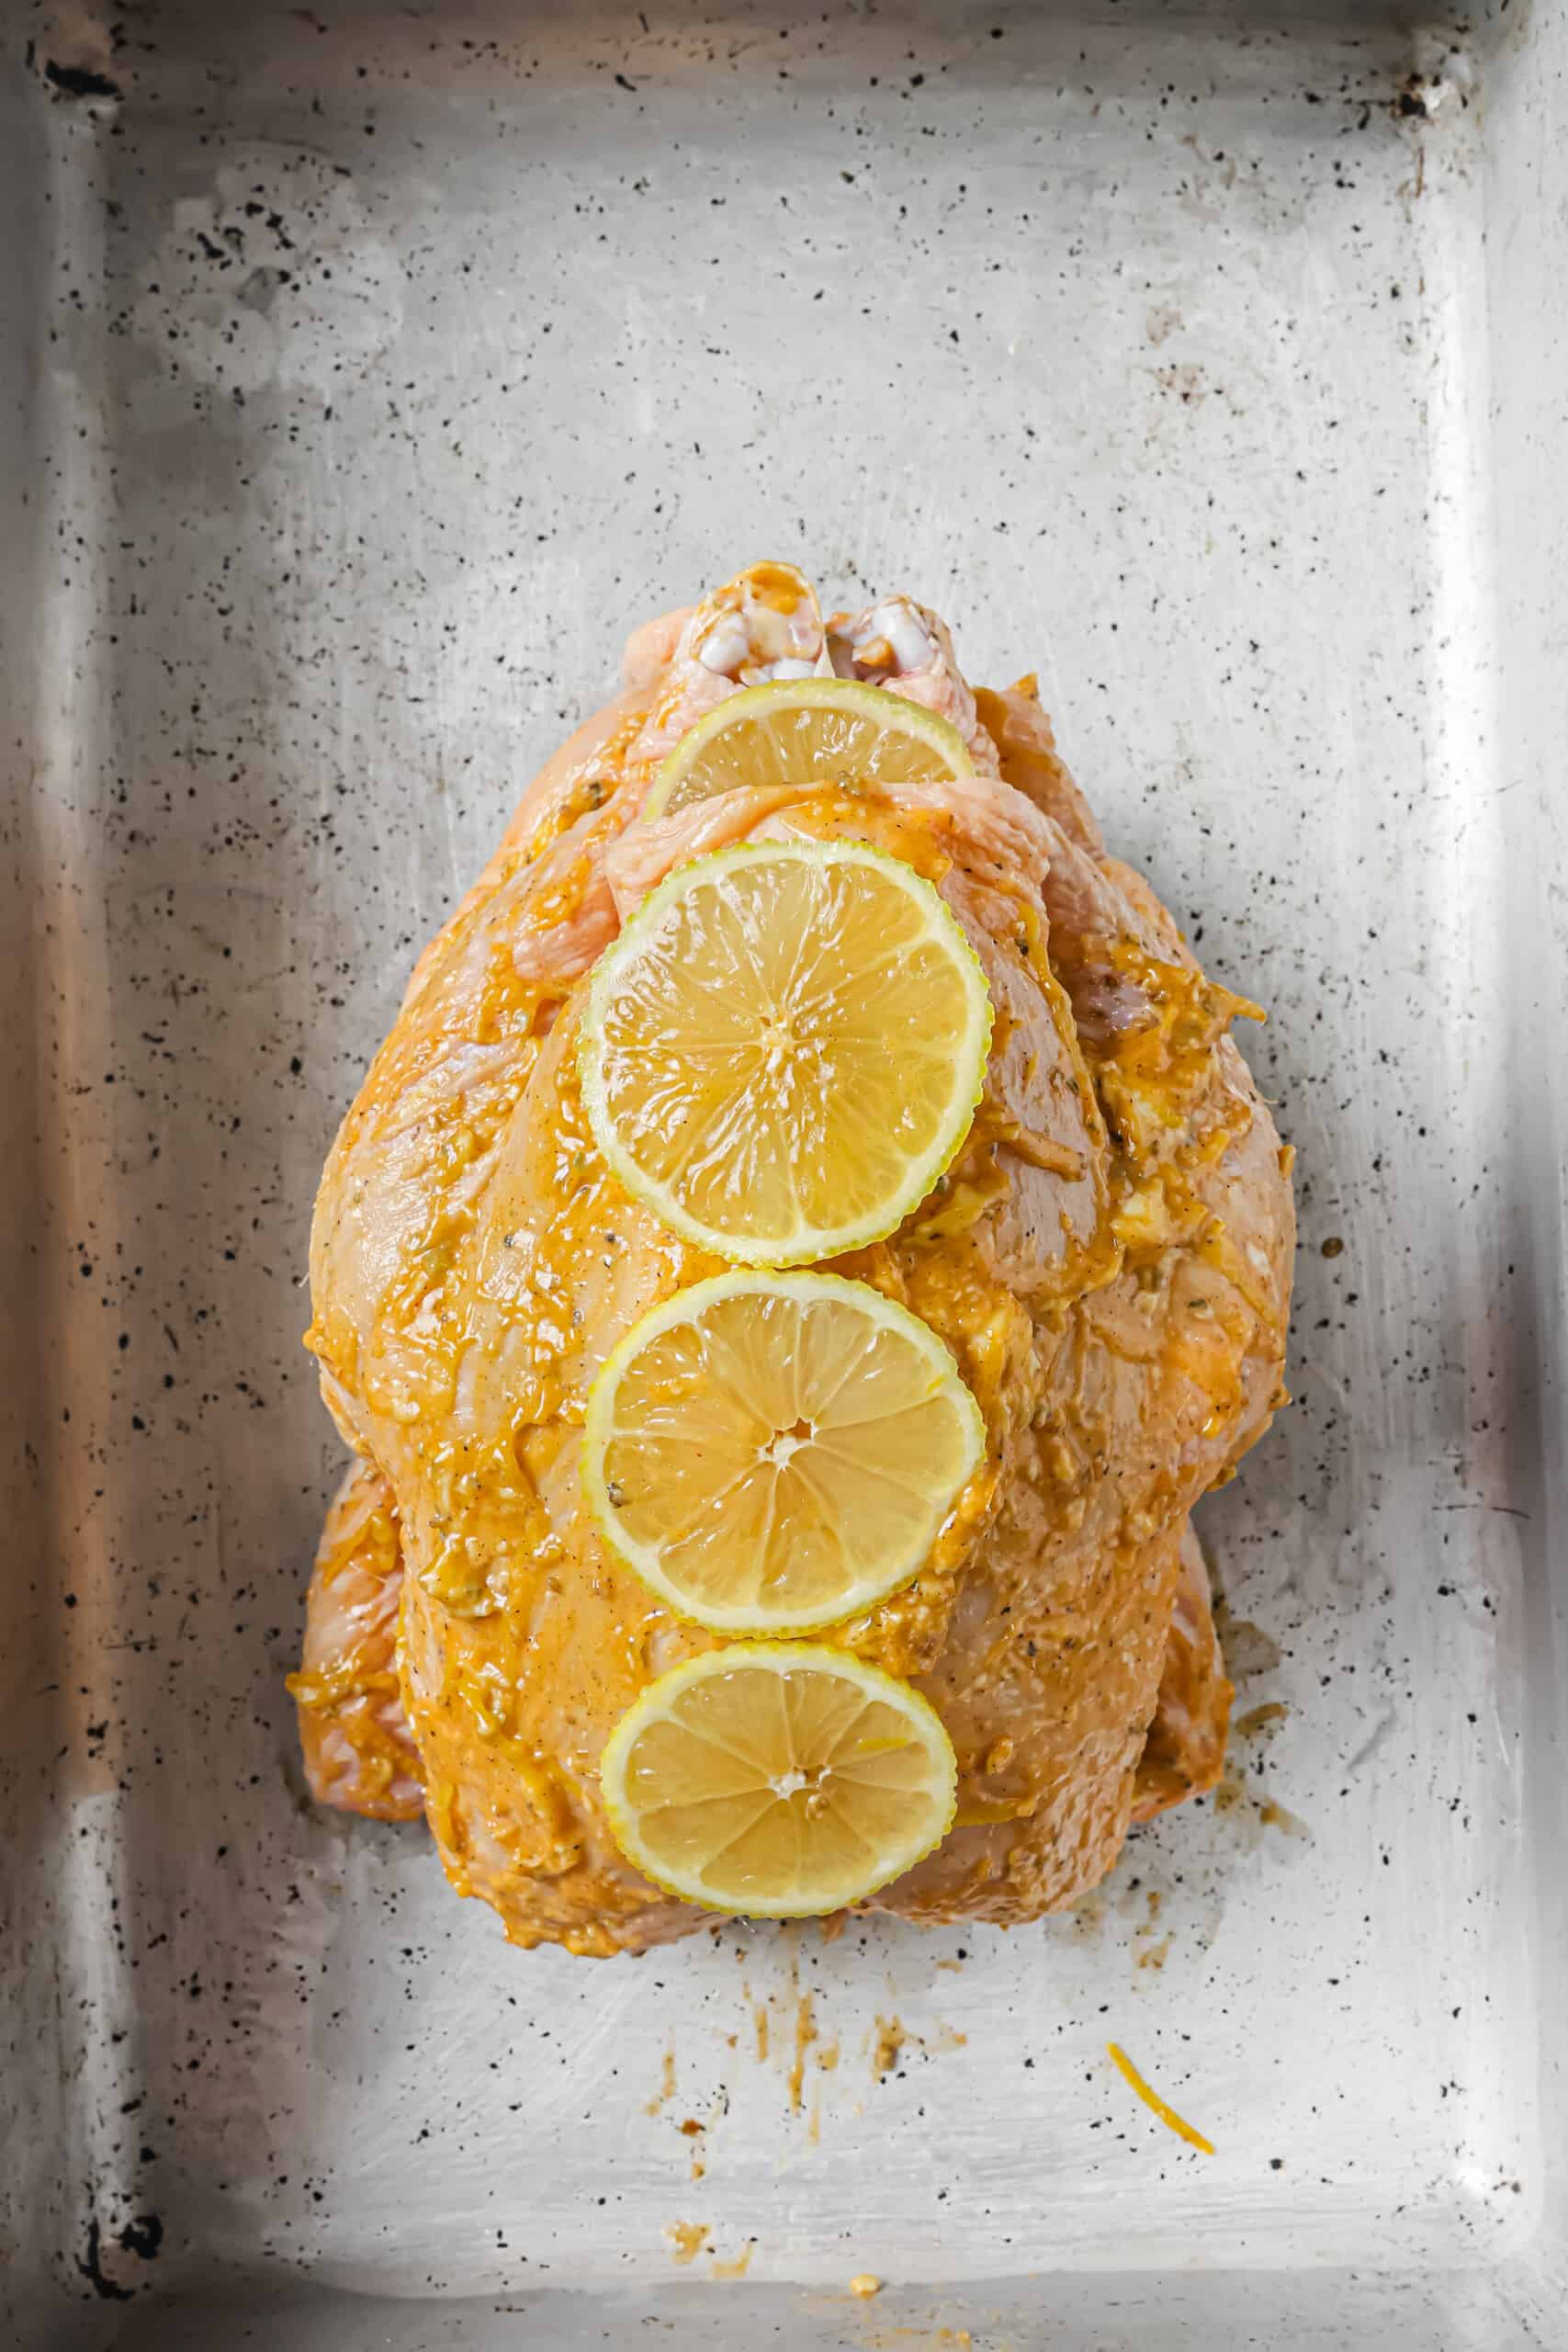 Placing lemon slices on the chicken rubbed with flavored butter. 